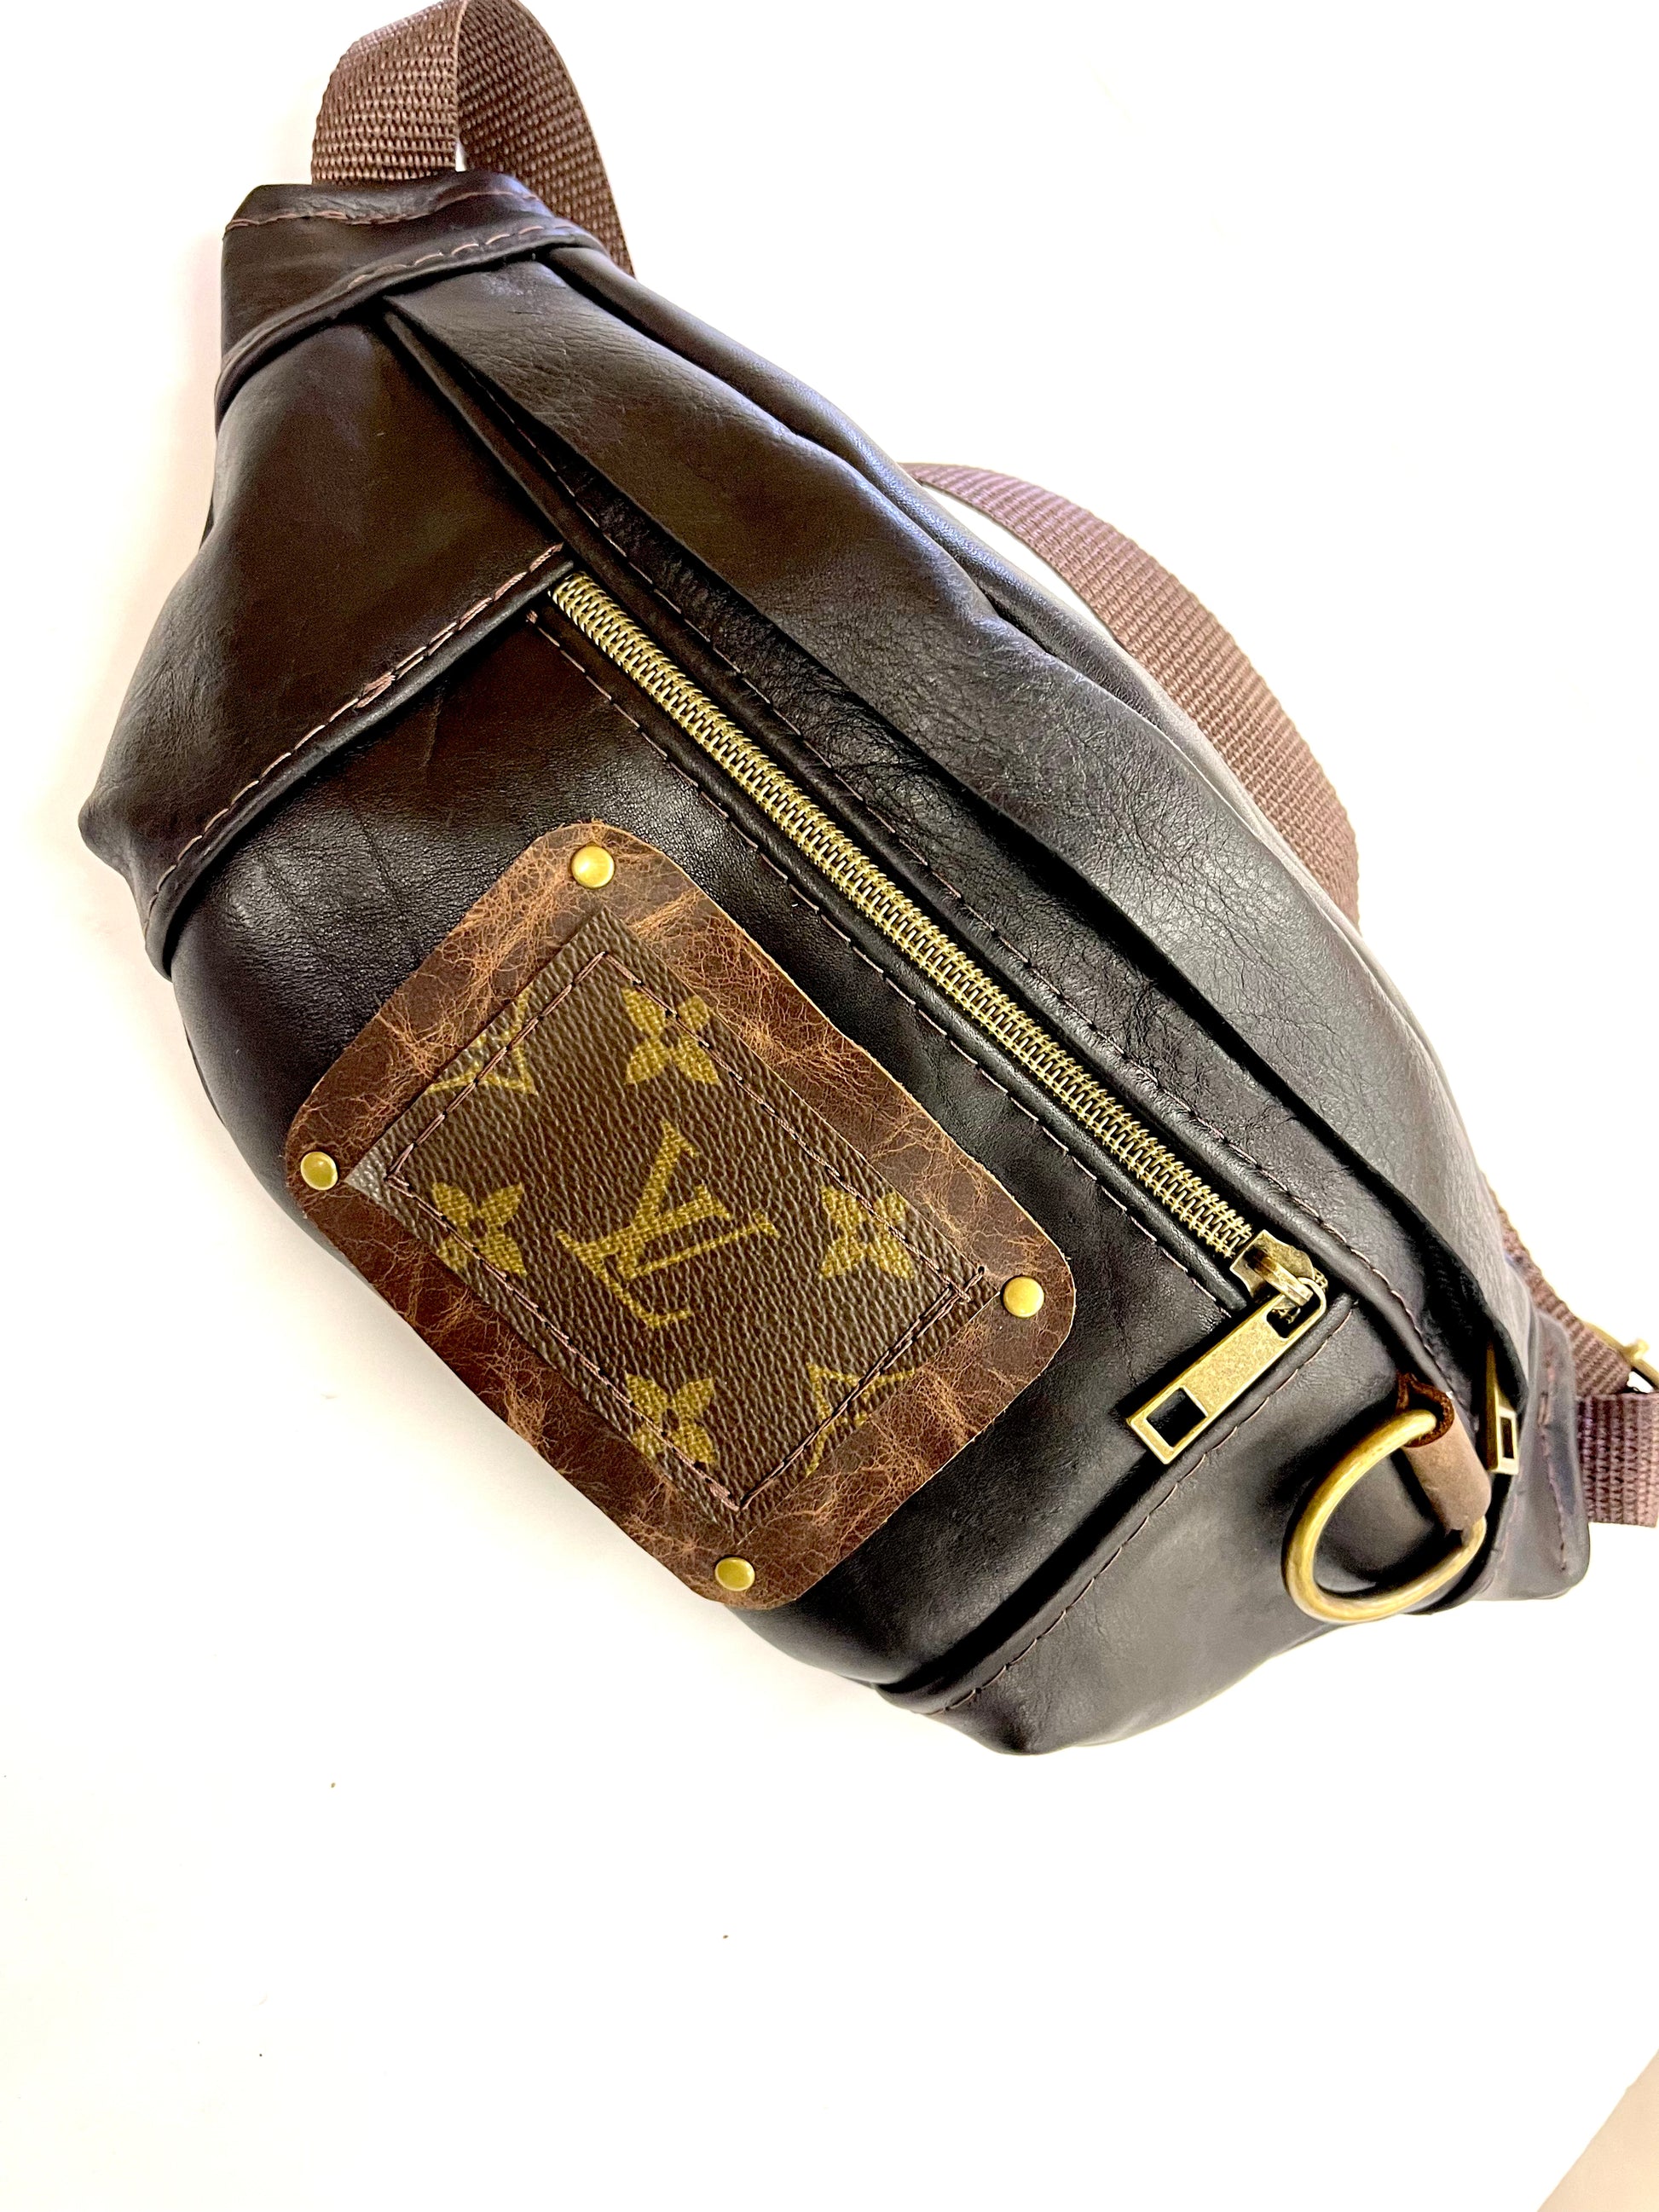 Adjustable Bum Bag Patch of Lv- Smooth Leathers - Patches Of Upcycling